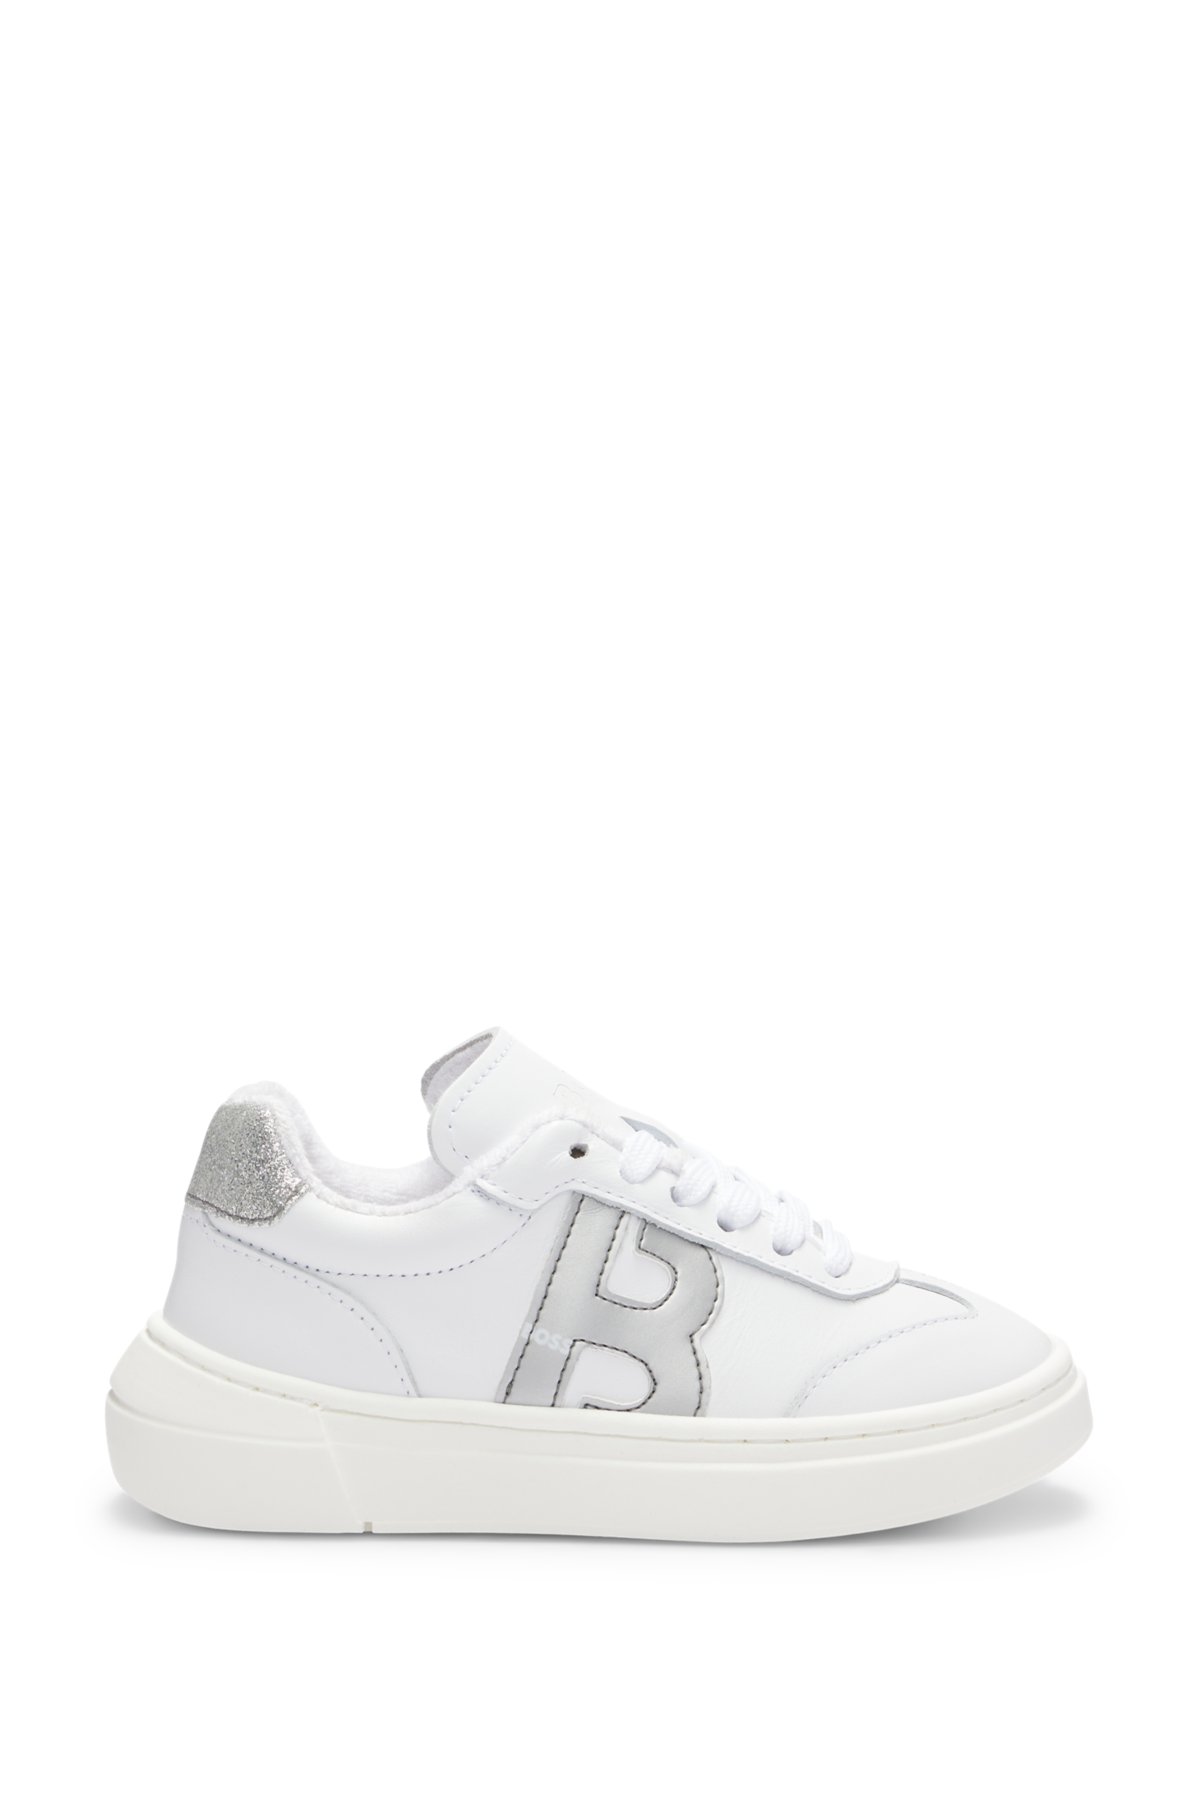 Kids' leather trainers with monogram detail, White